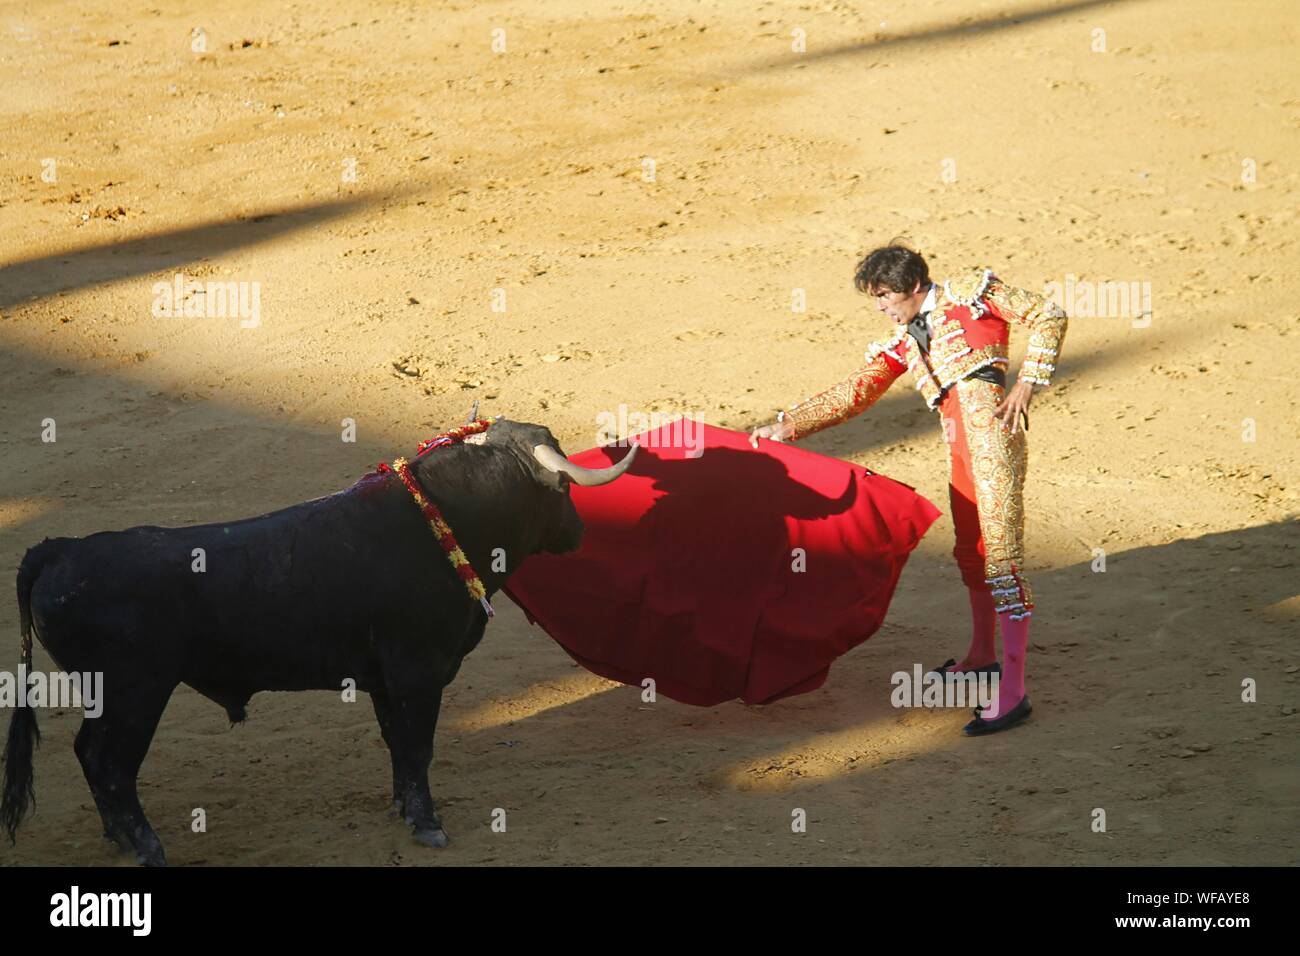 Side View Of Matador Showing Red Cape With Black Bull On Field Stock Photo Alamy